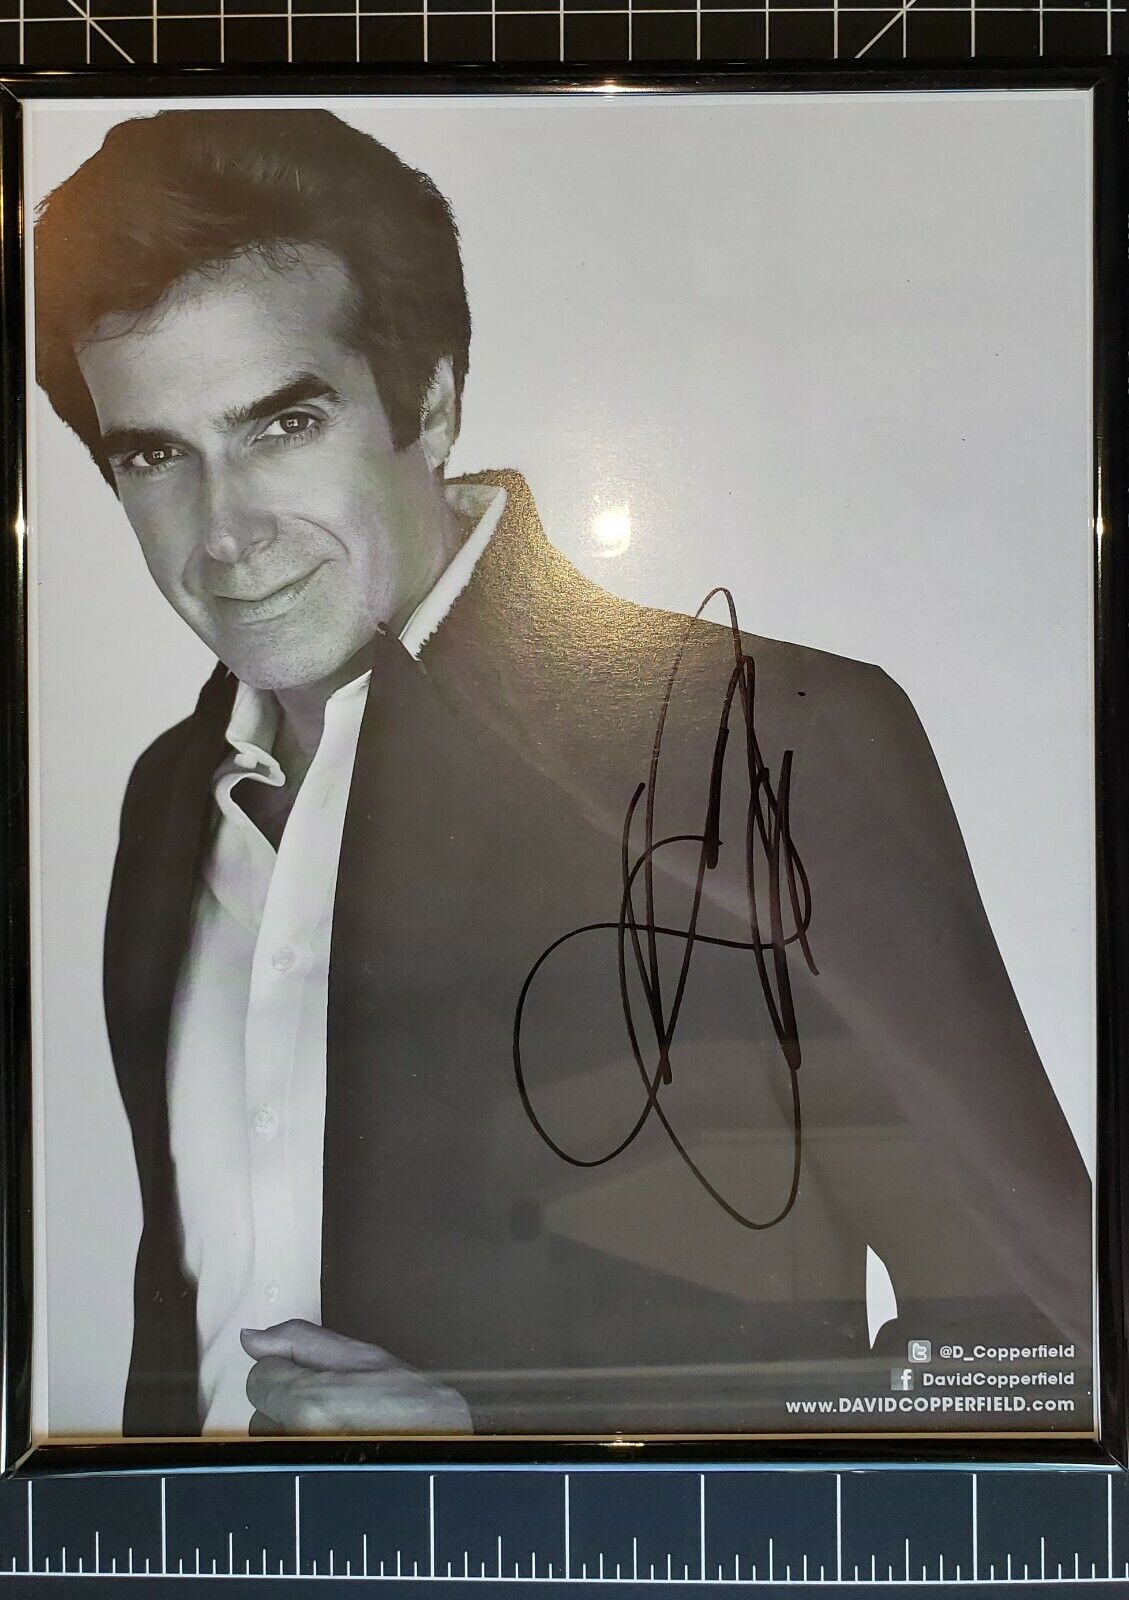 2016 David Copperfield Framed Autographed 8x10